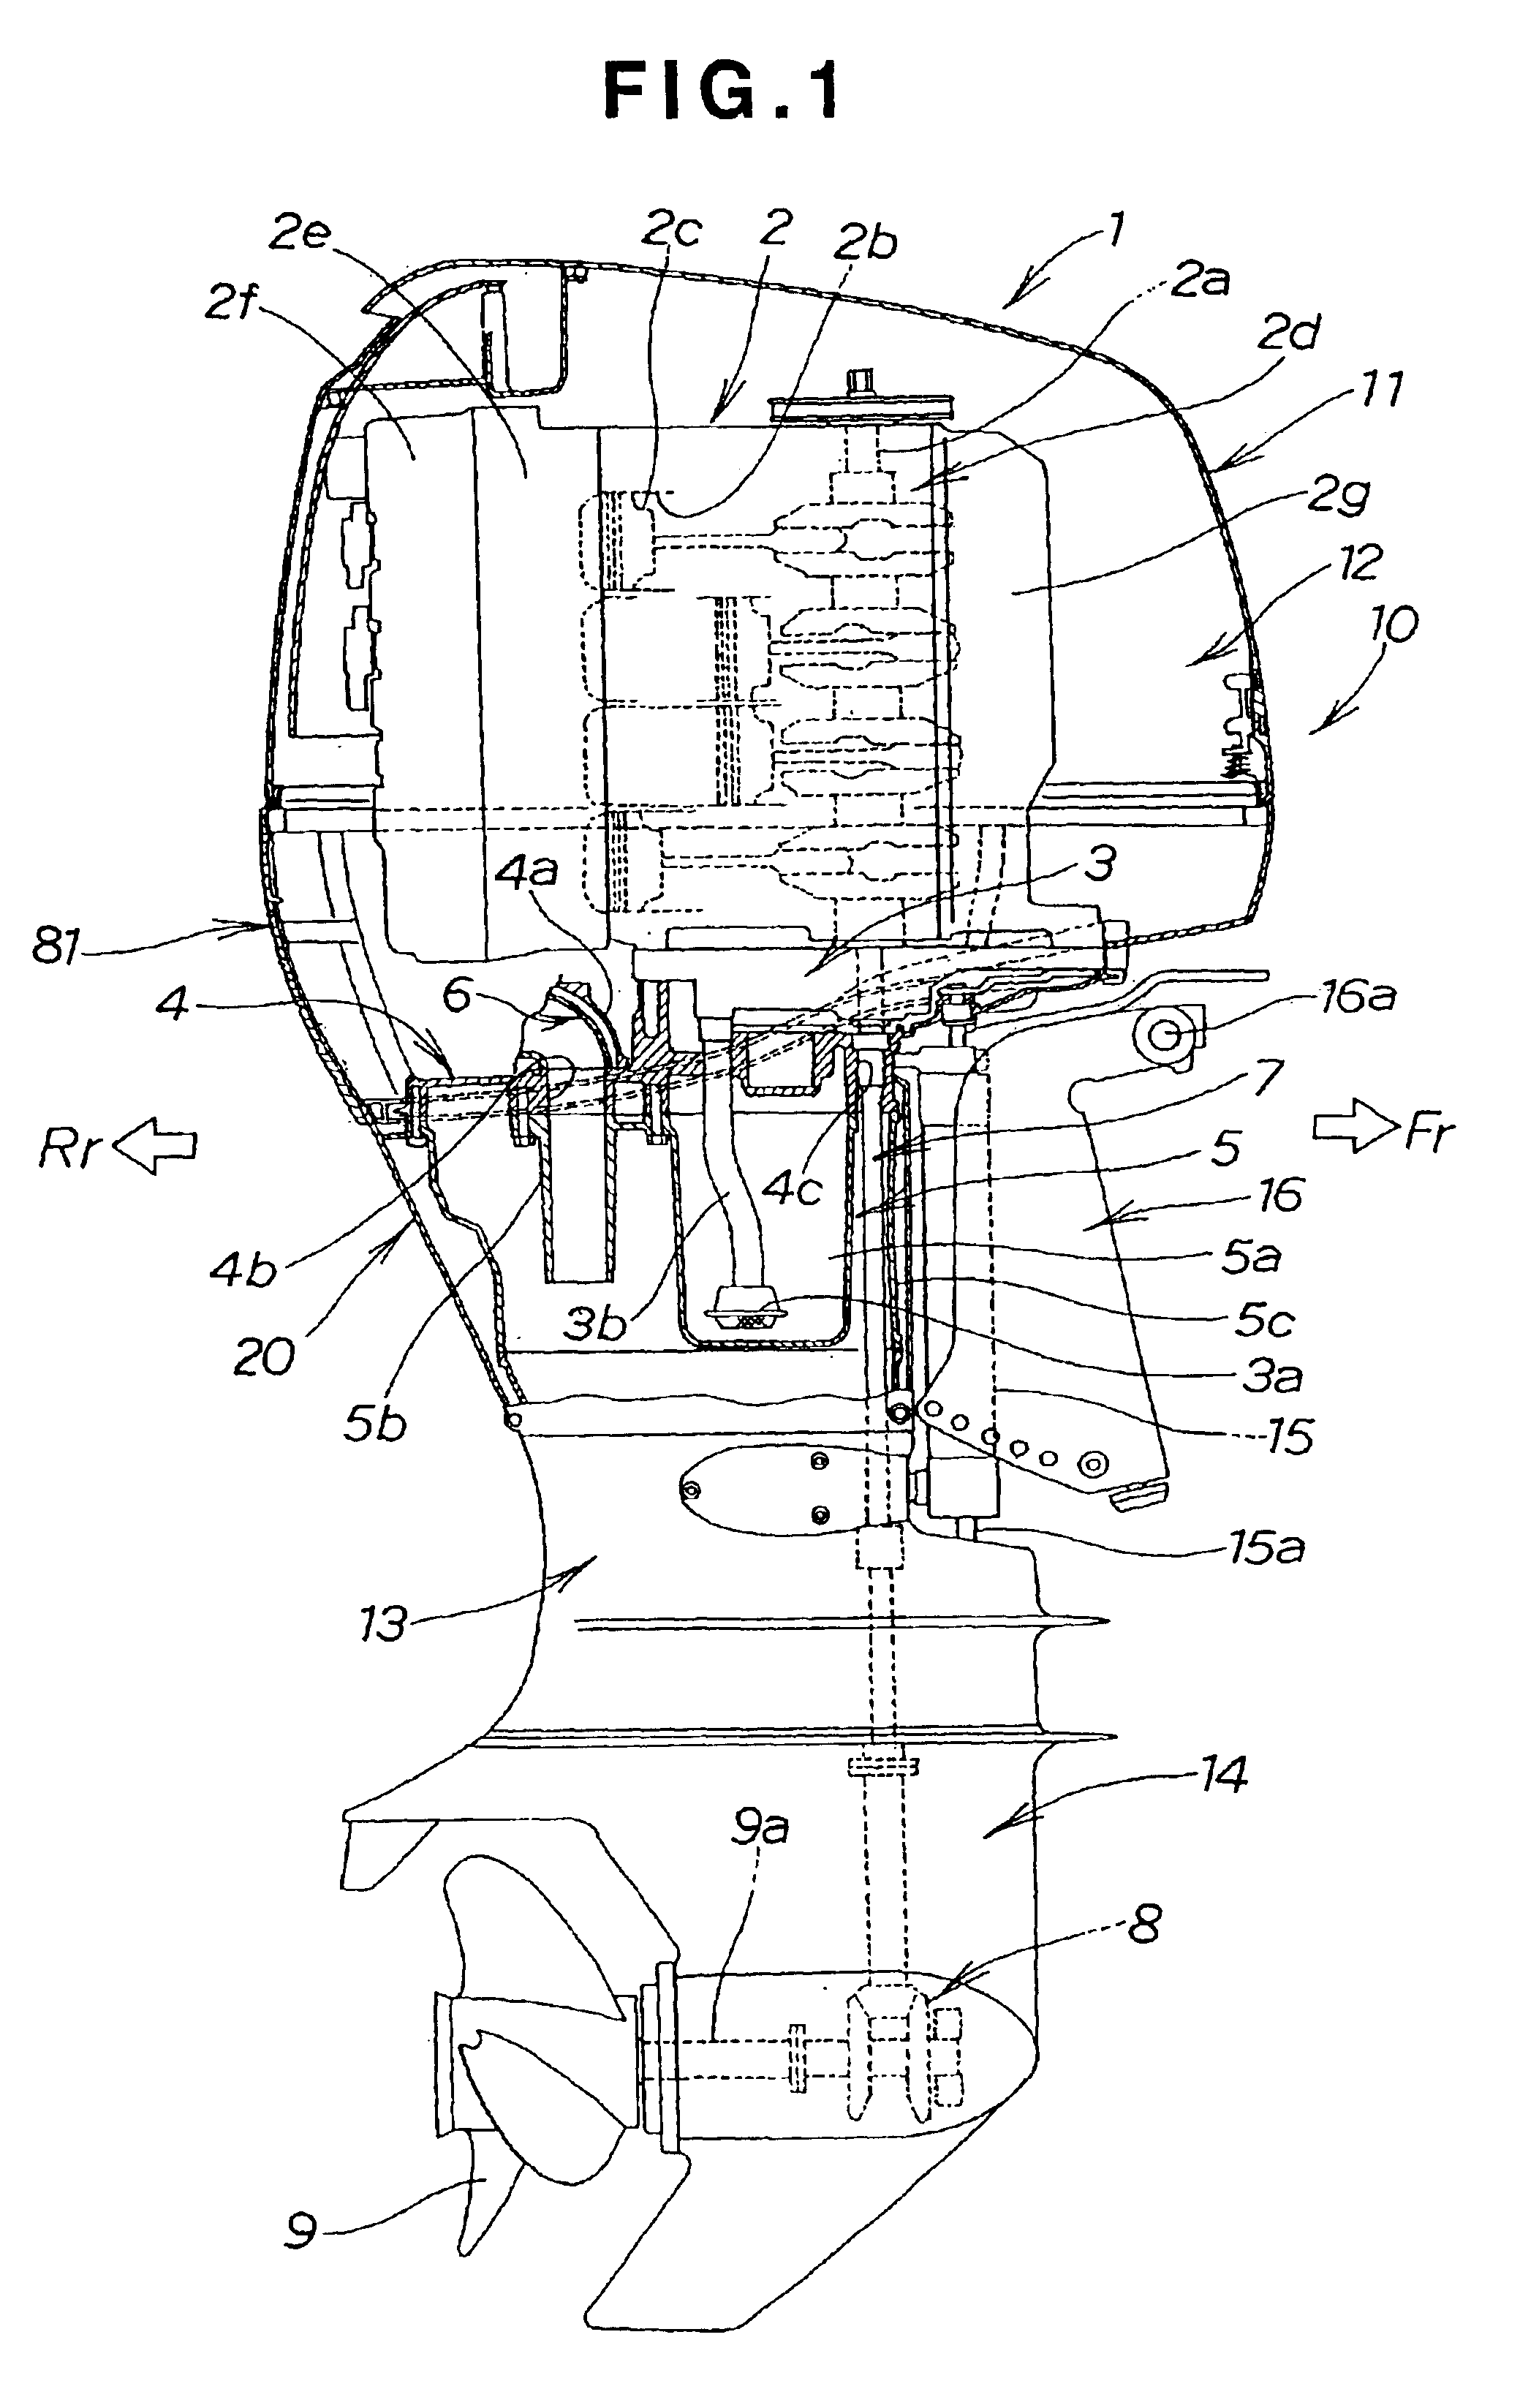 Cover joining structure for outboard engine unit